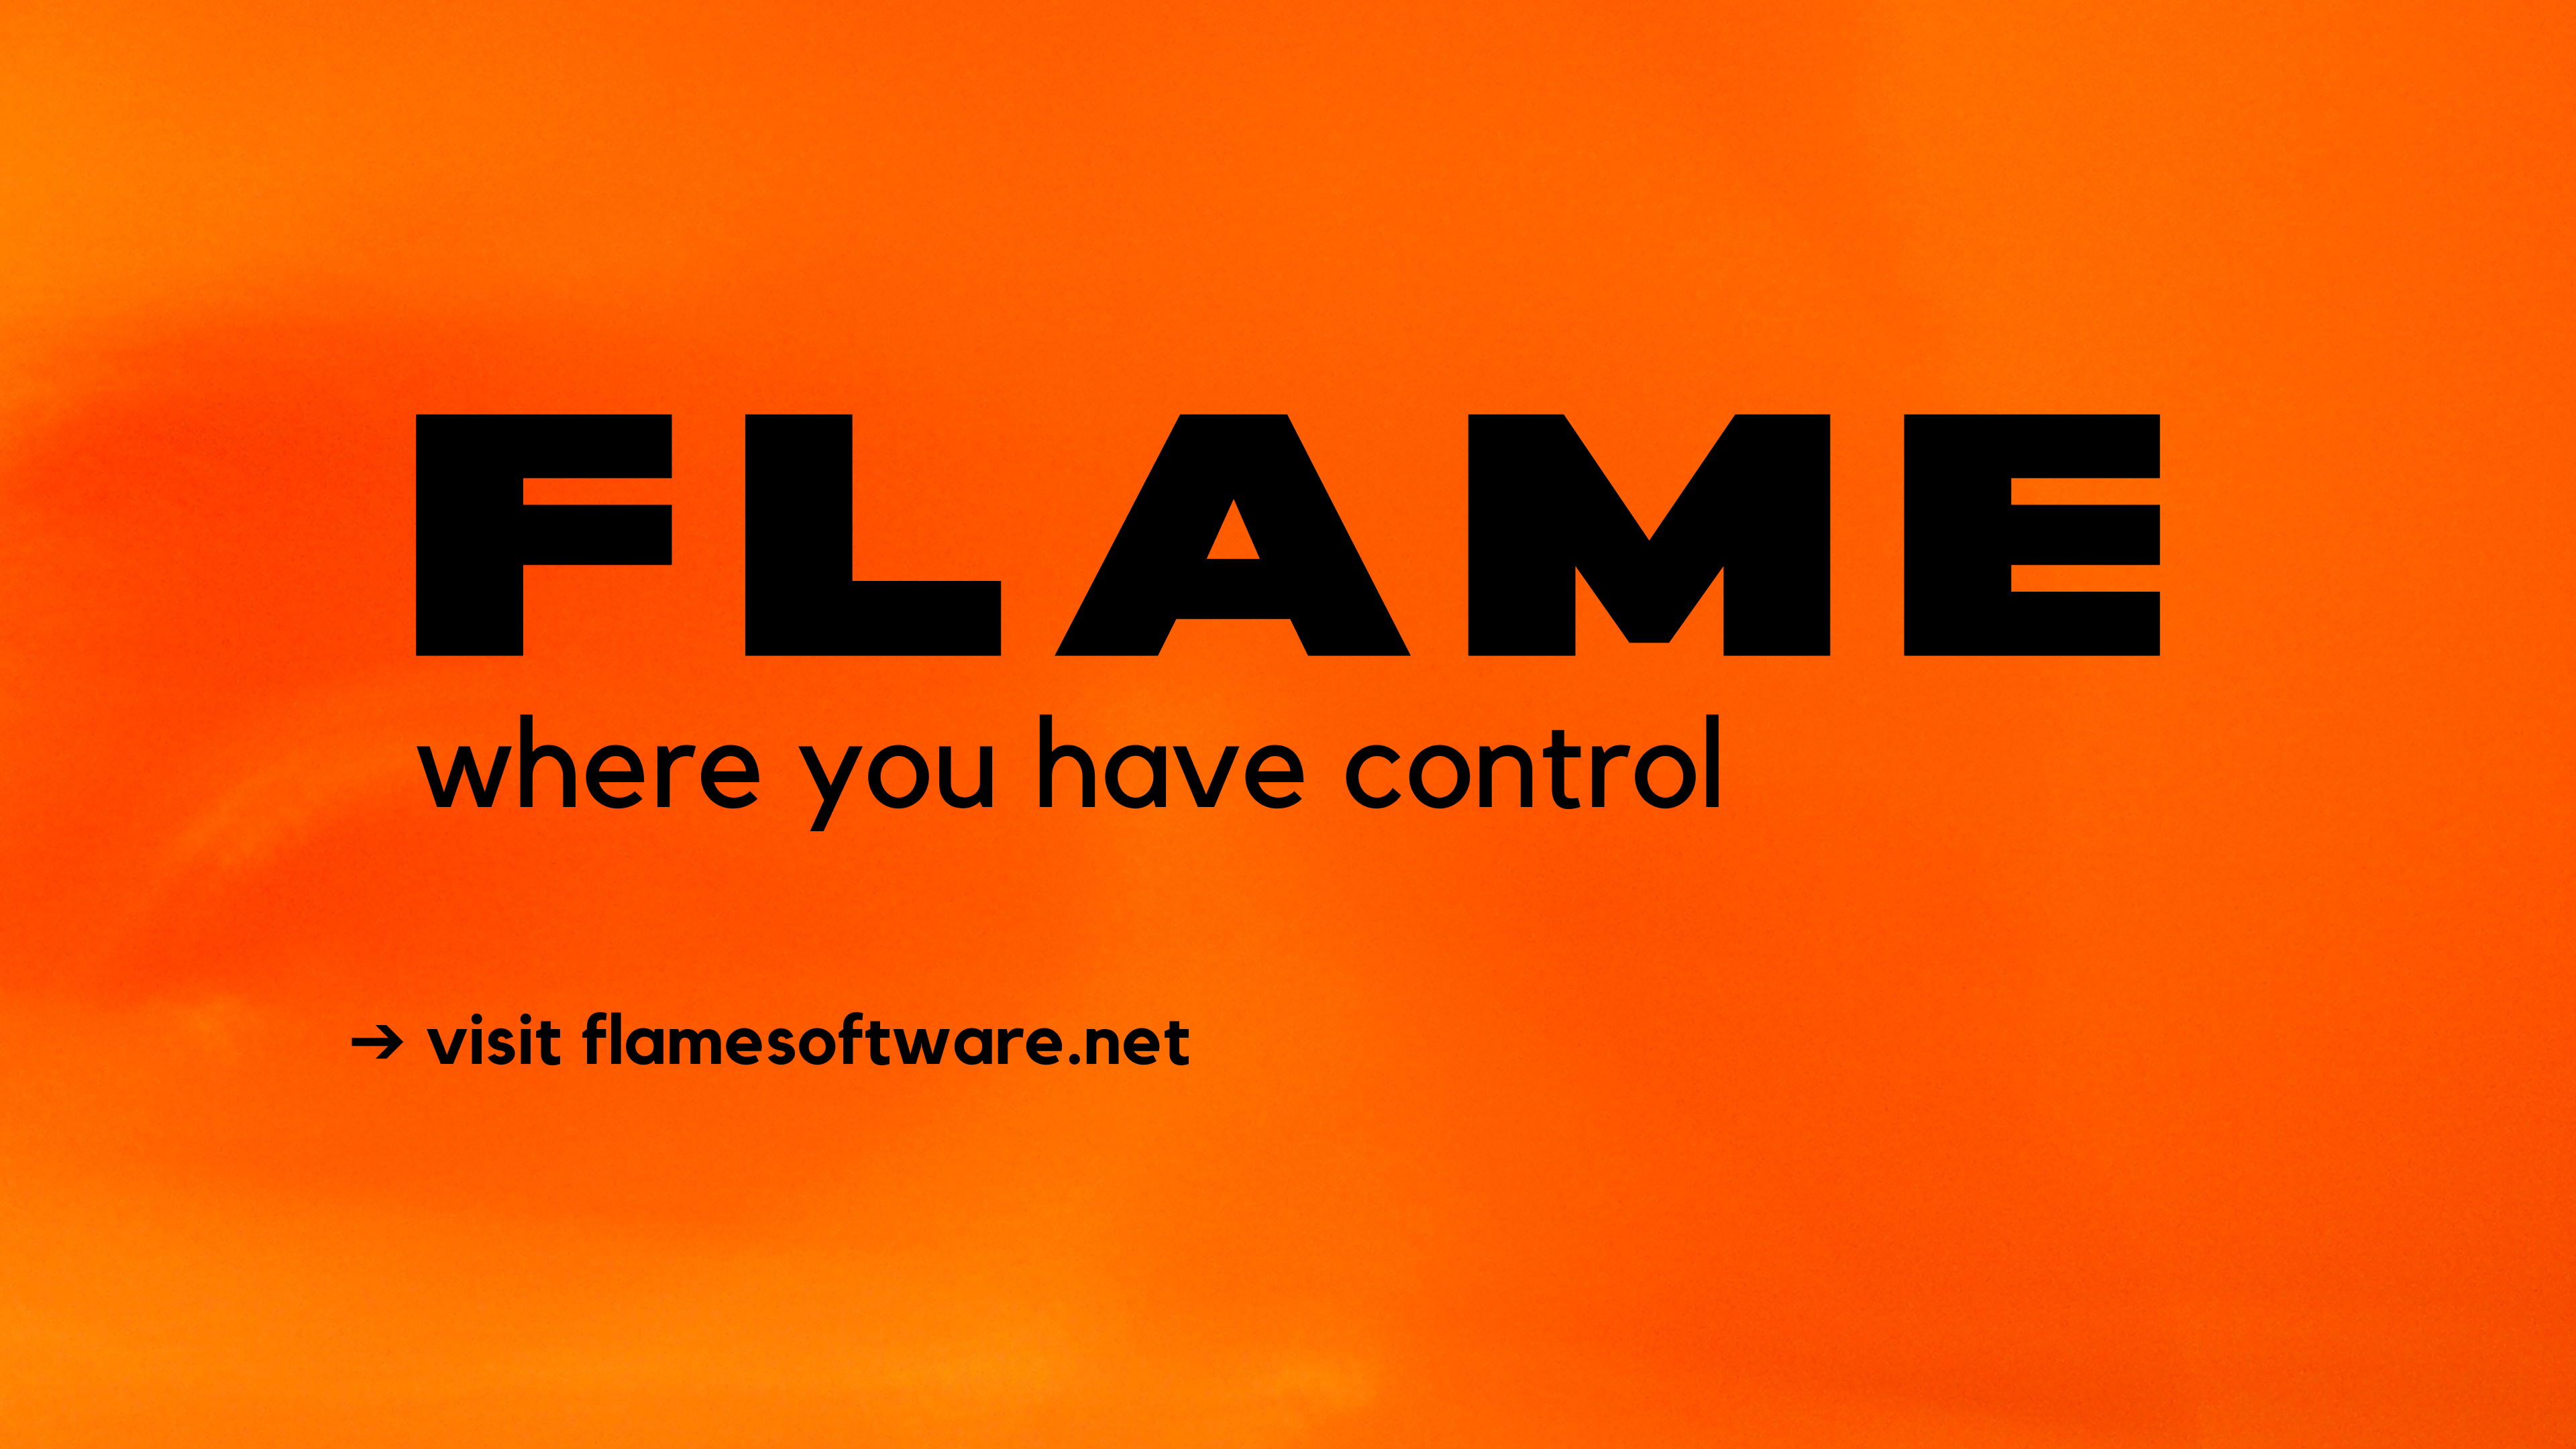 Flame, where you have control